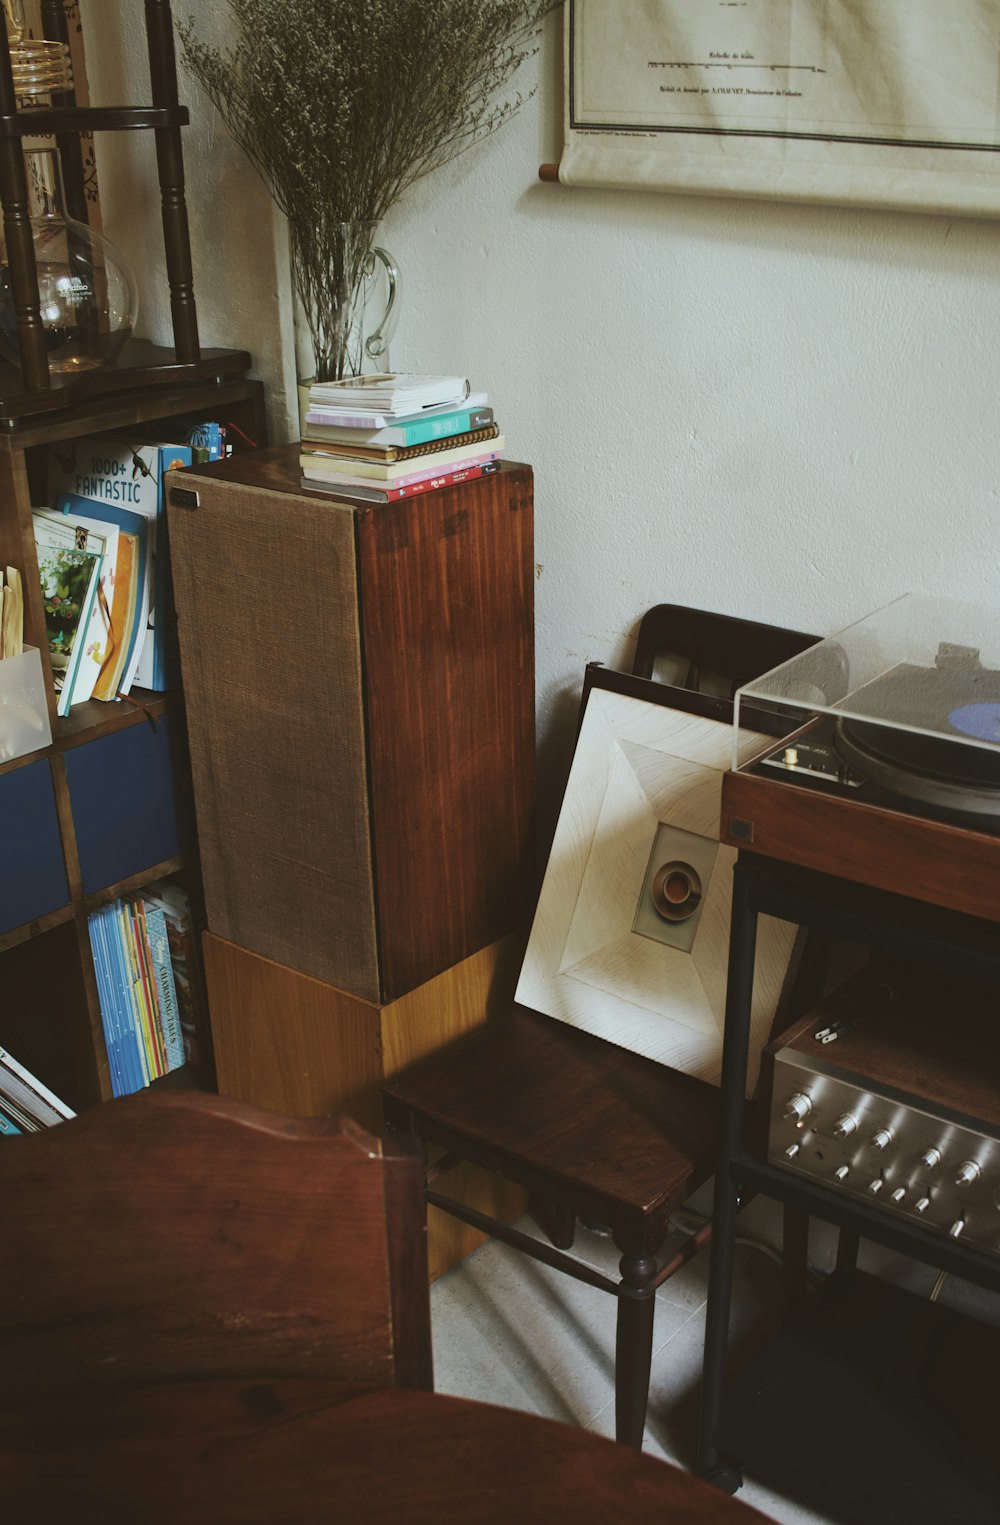 a record player sitting on top of a wooden table